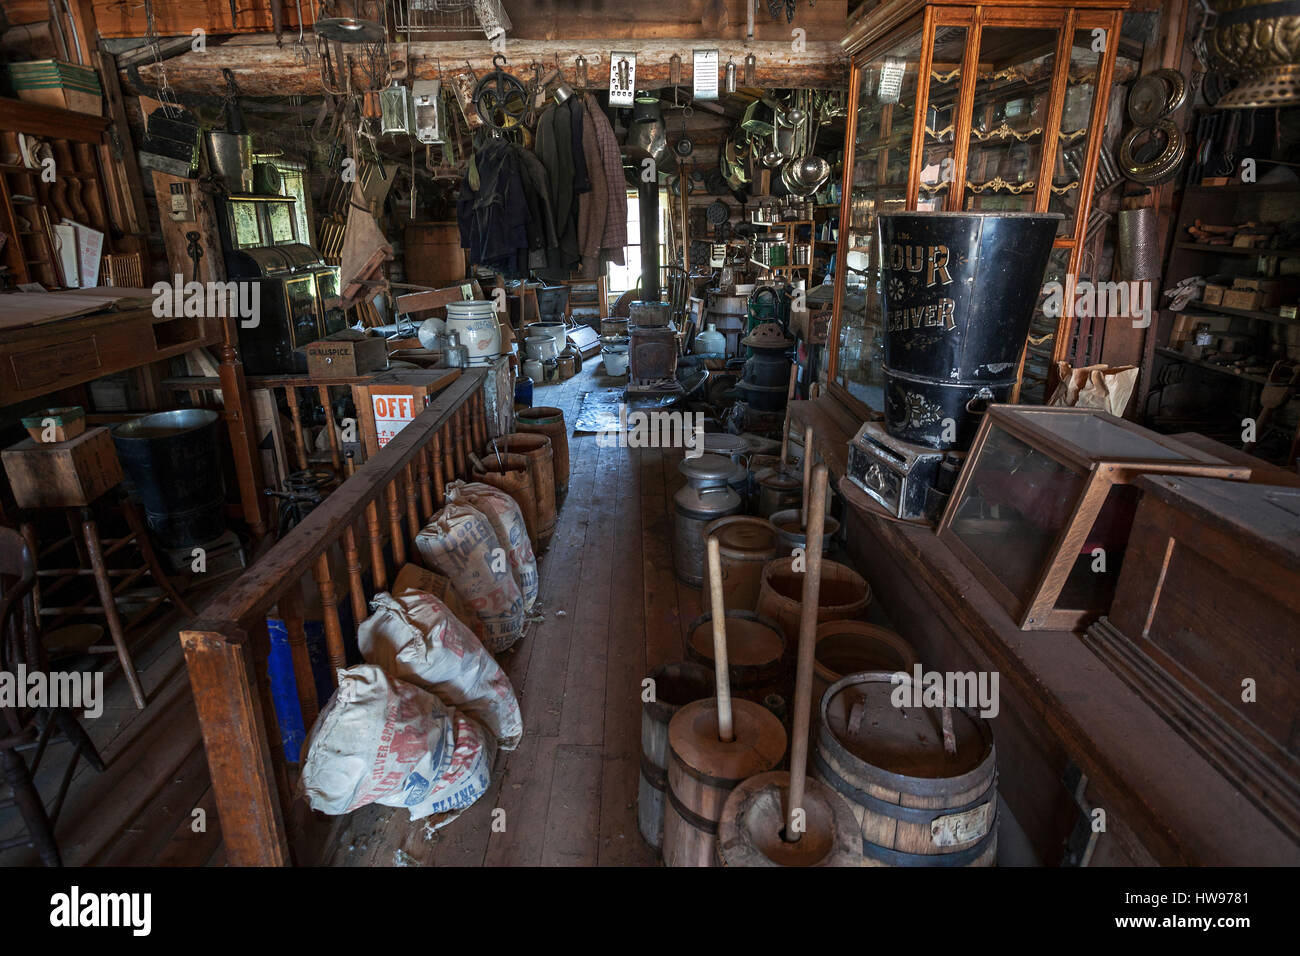 Old Shop, Wild West open-air museum, Nevada City Museum, former gold mining town, Ghost Town, Montana Province, USA Stock Photo